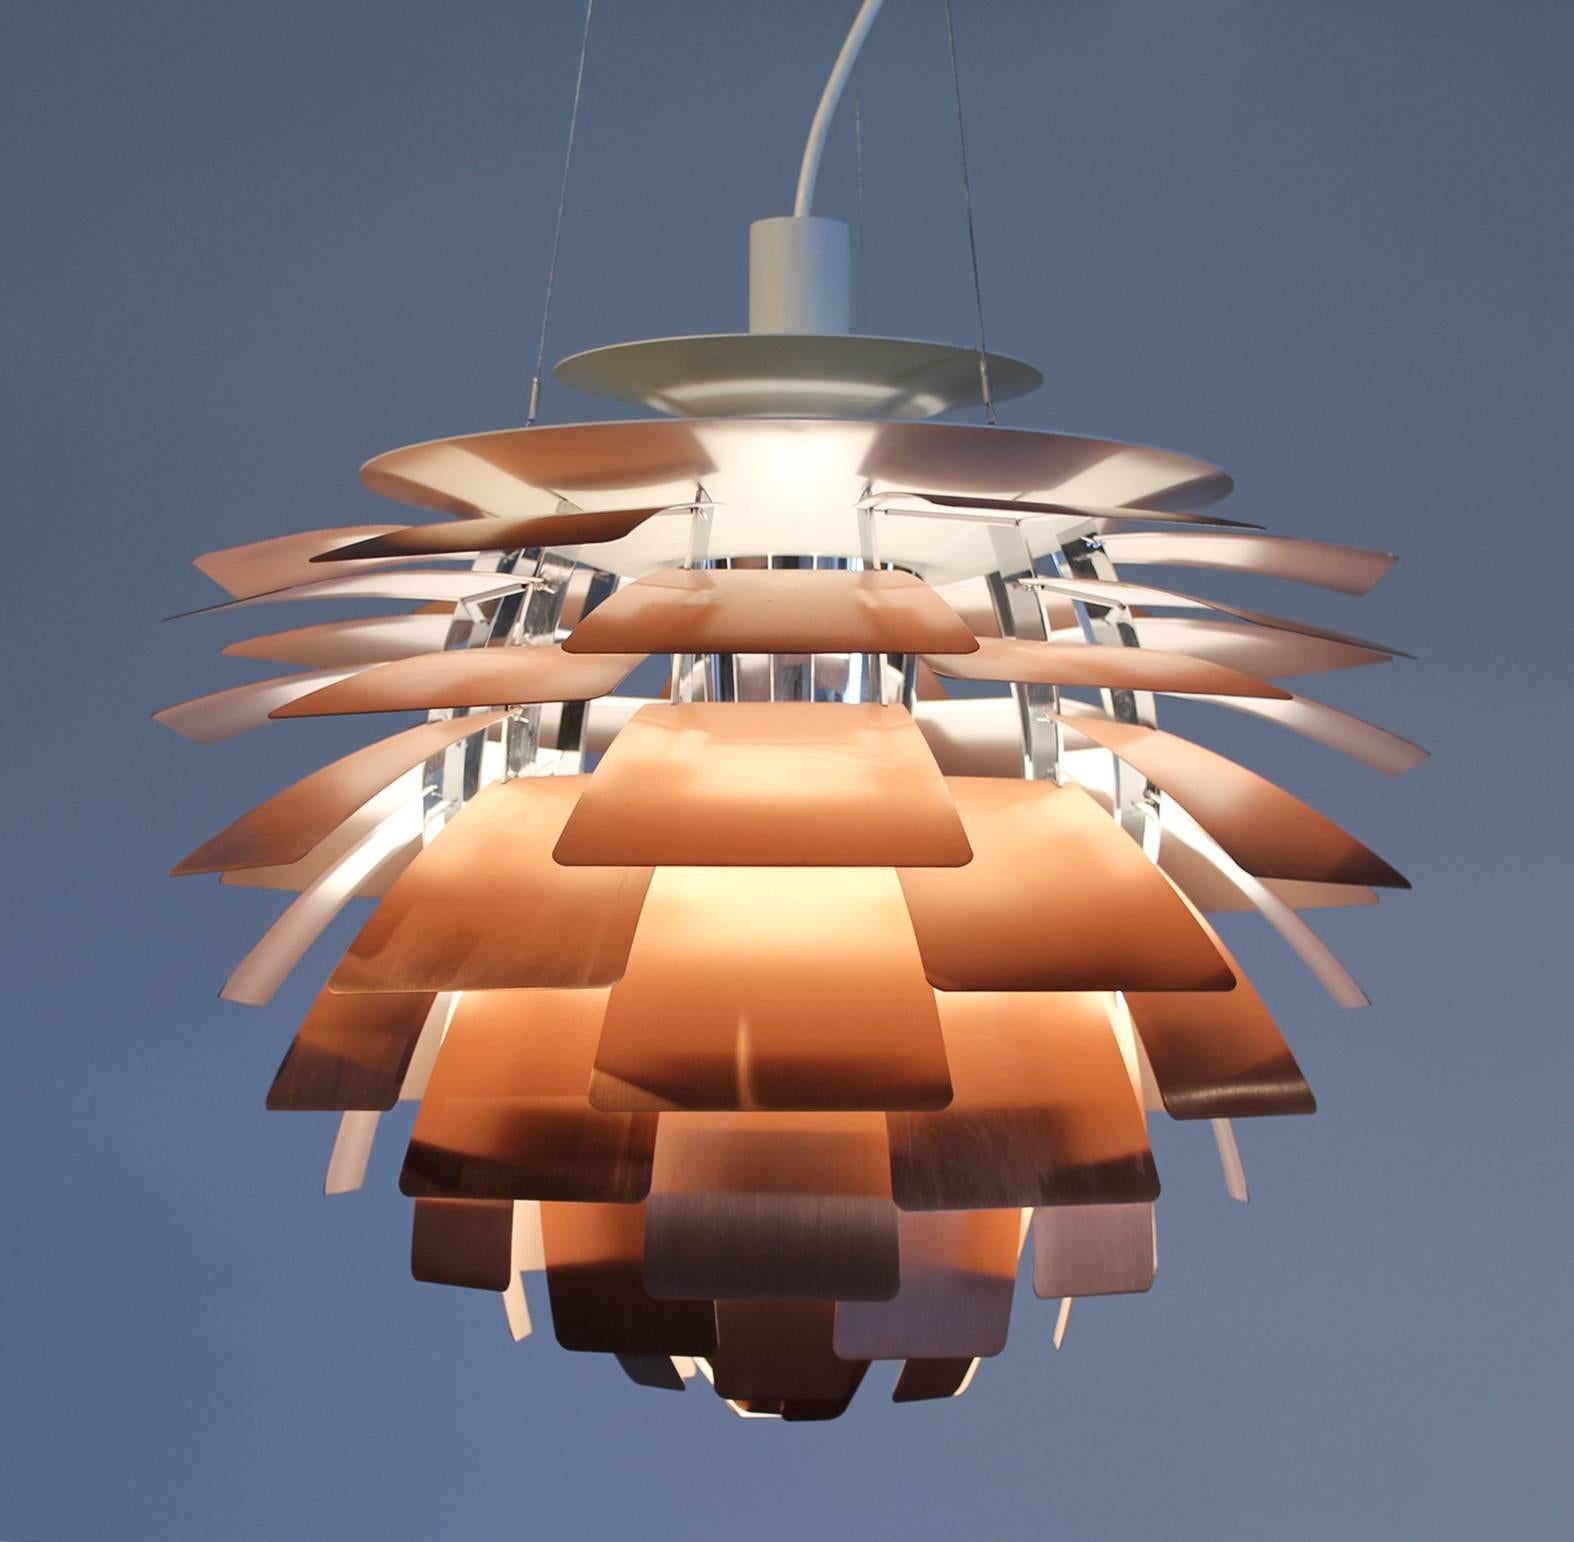 PH Artichoke pendant light designed by Poul Henningsen and made in Denmark by Louis Poulsen 1958. Constructed from Copper, enameled steel, chrome plated brass and enameled aluminium.

The Artichoke pendant chandelier was designed in 1958 for the